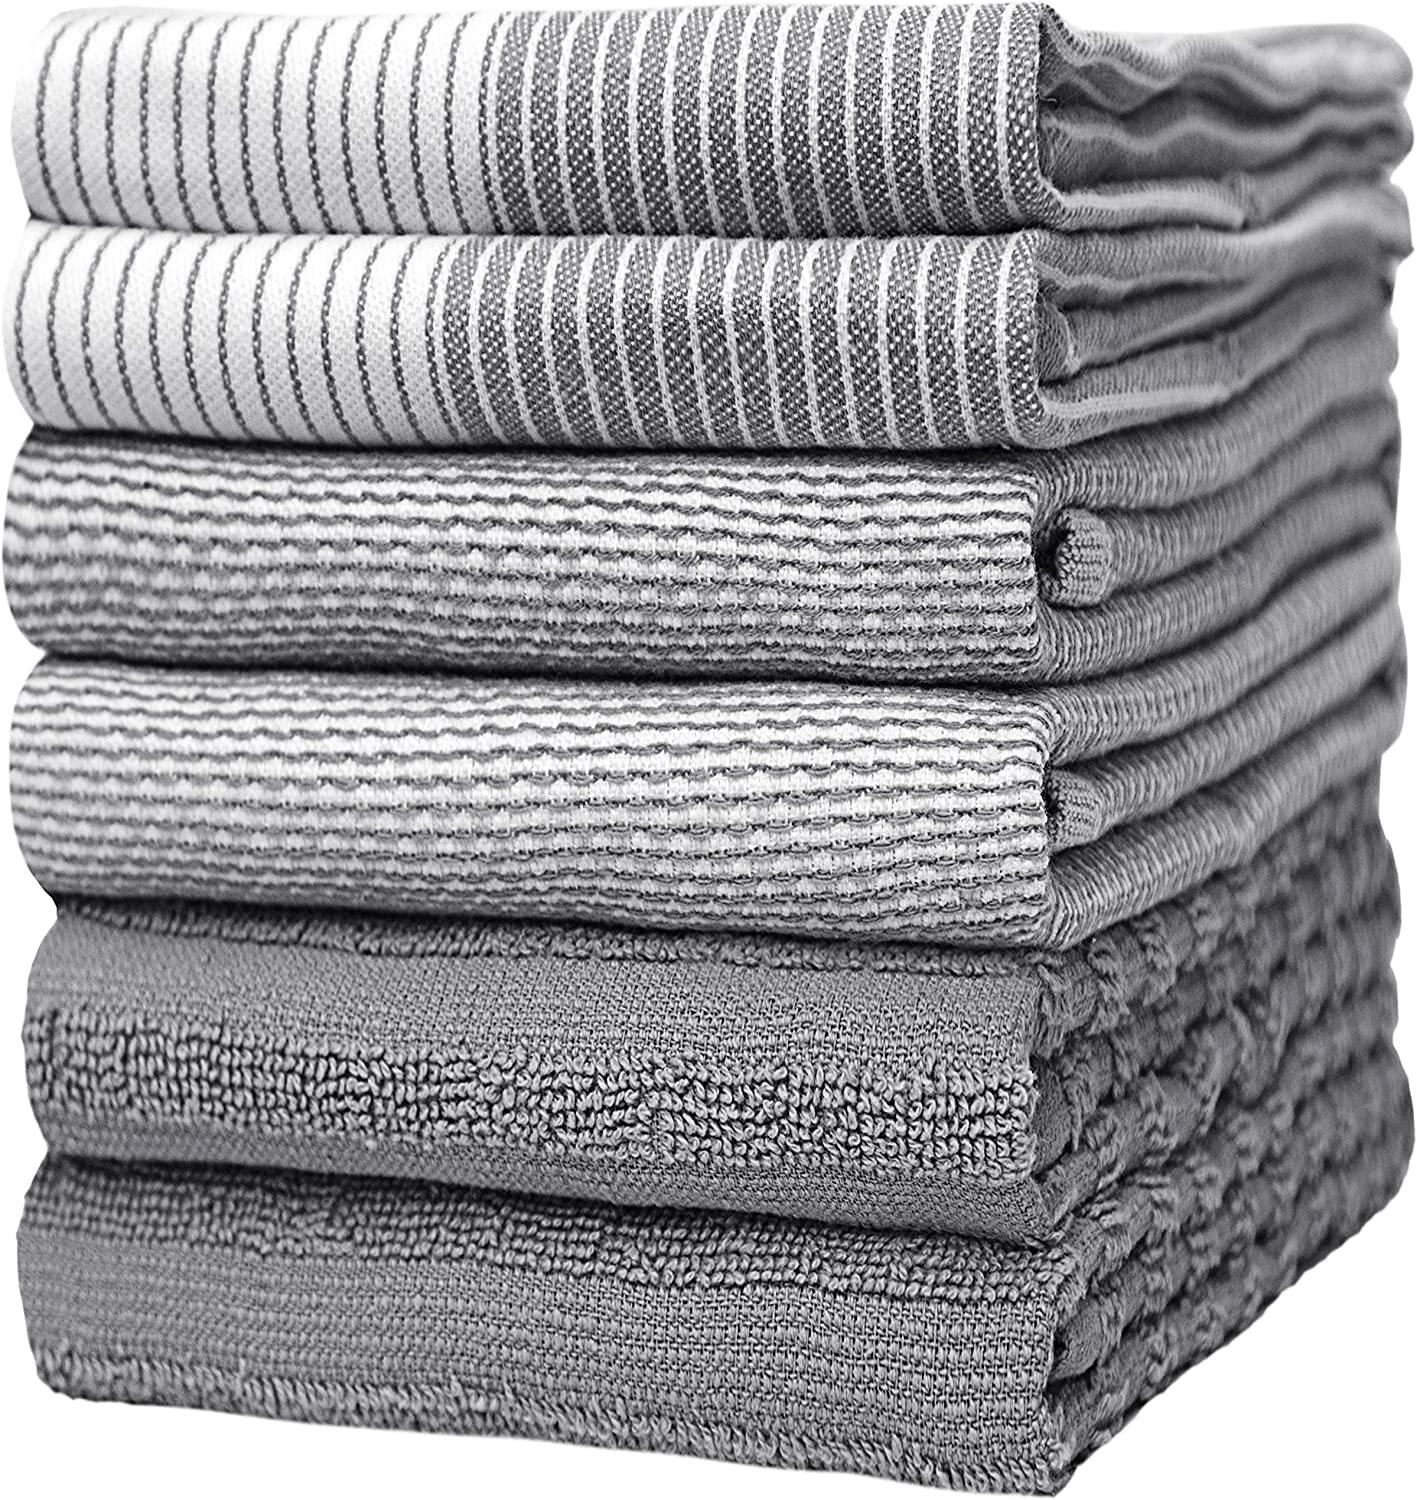 Bumble Towels Ultra Soft Eco-Friendly Kitchen Towels, 6-Pack